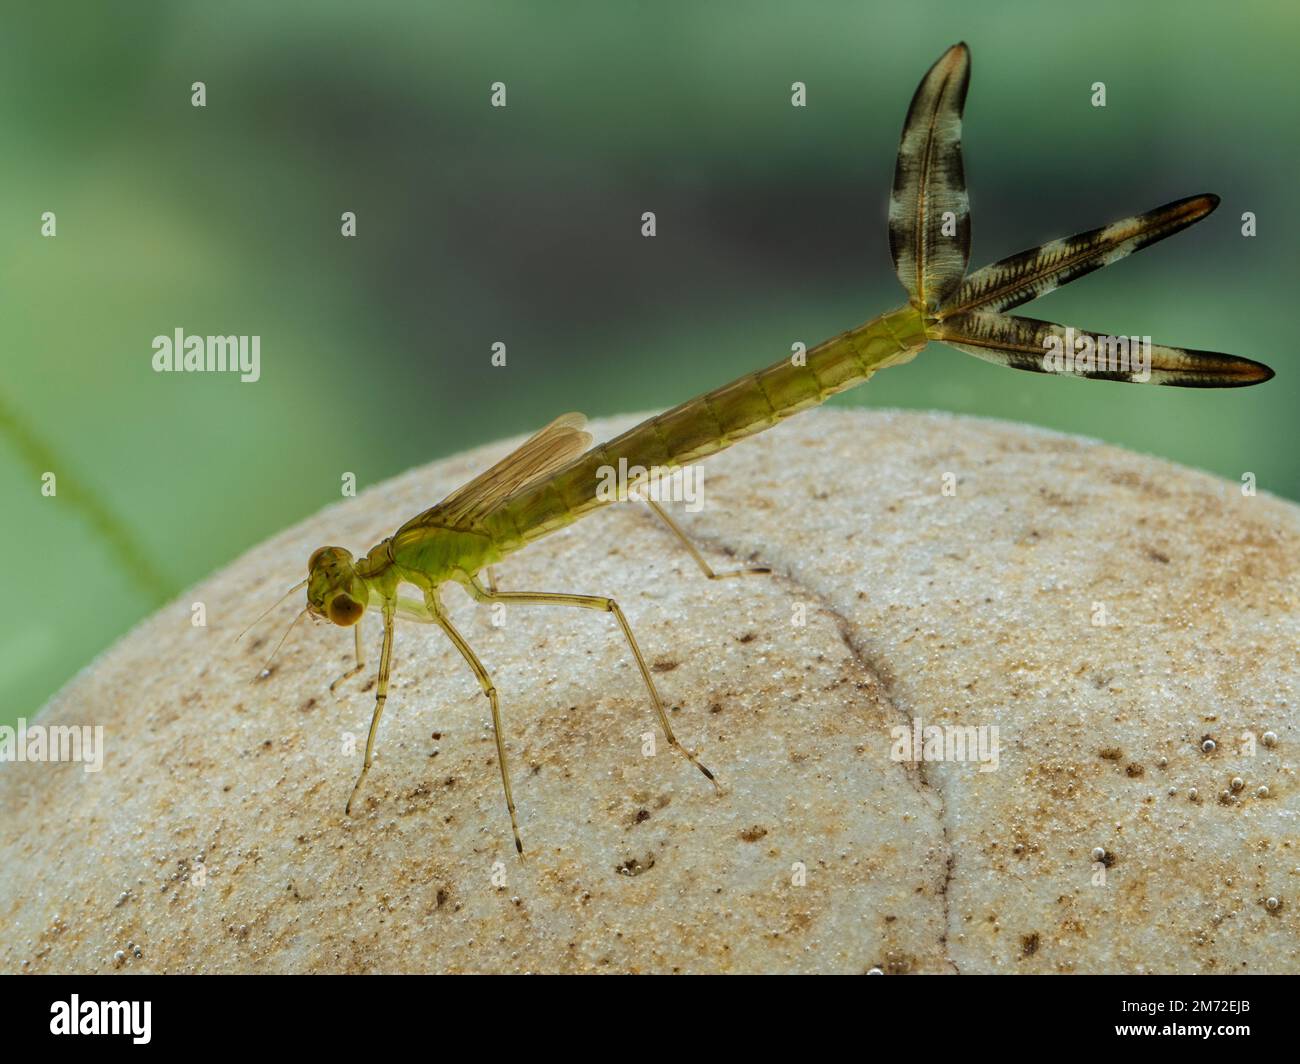 Side view of an aquatic damselfly nymph (or naiad) (Zygoptera species) resting on a submerged stone. These predatory larvae eventually emerge from the Stock Photo